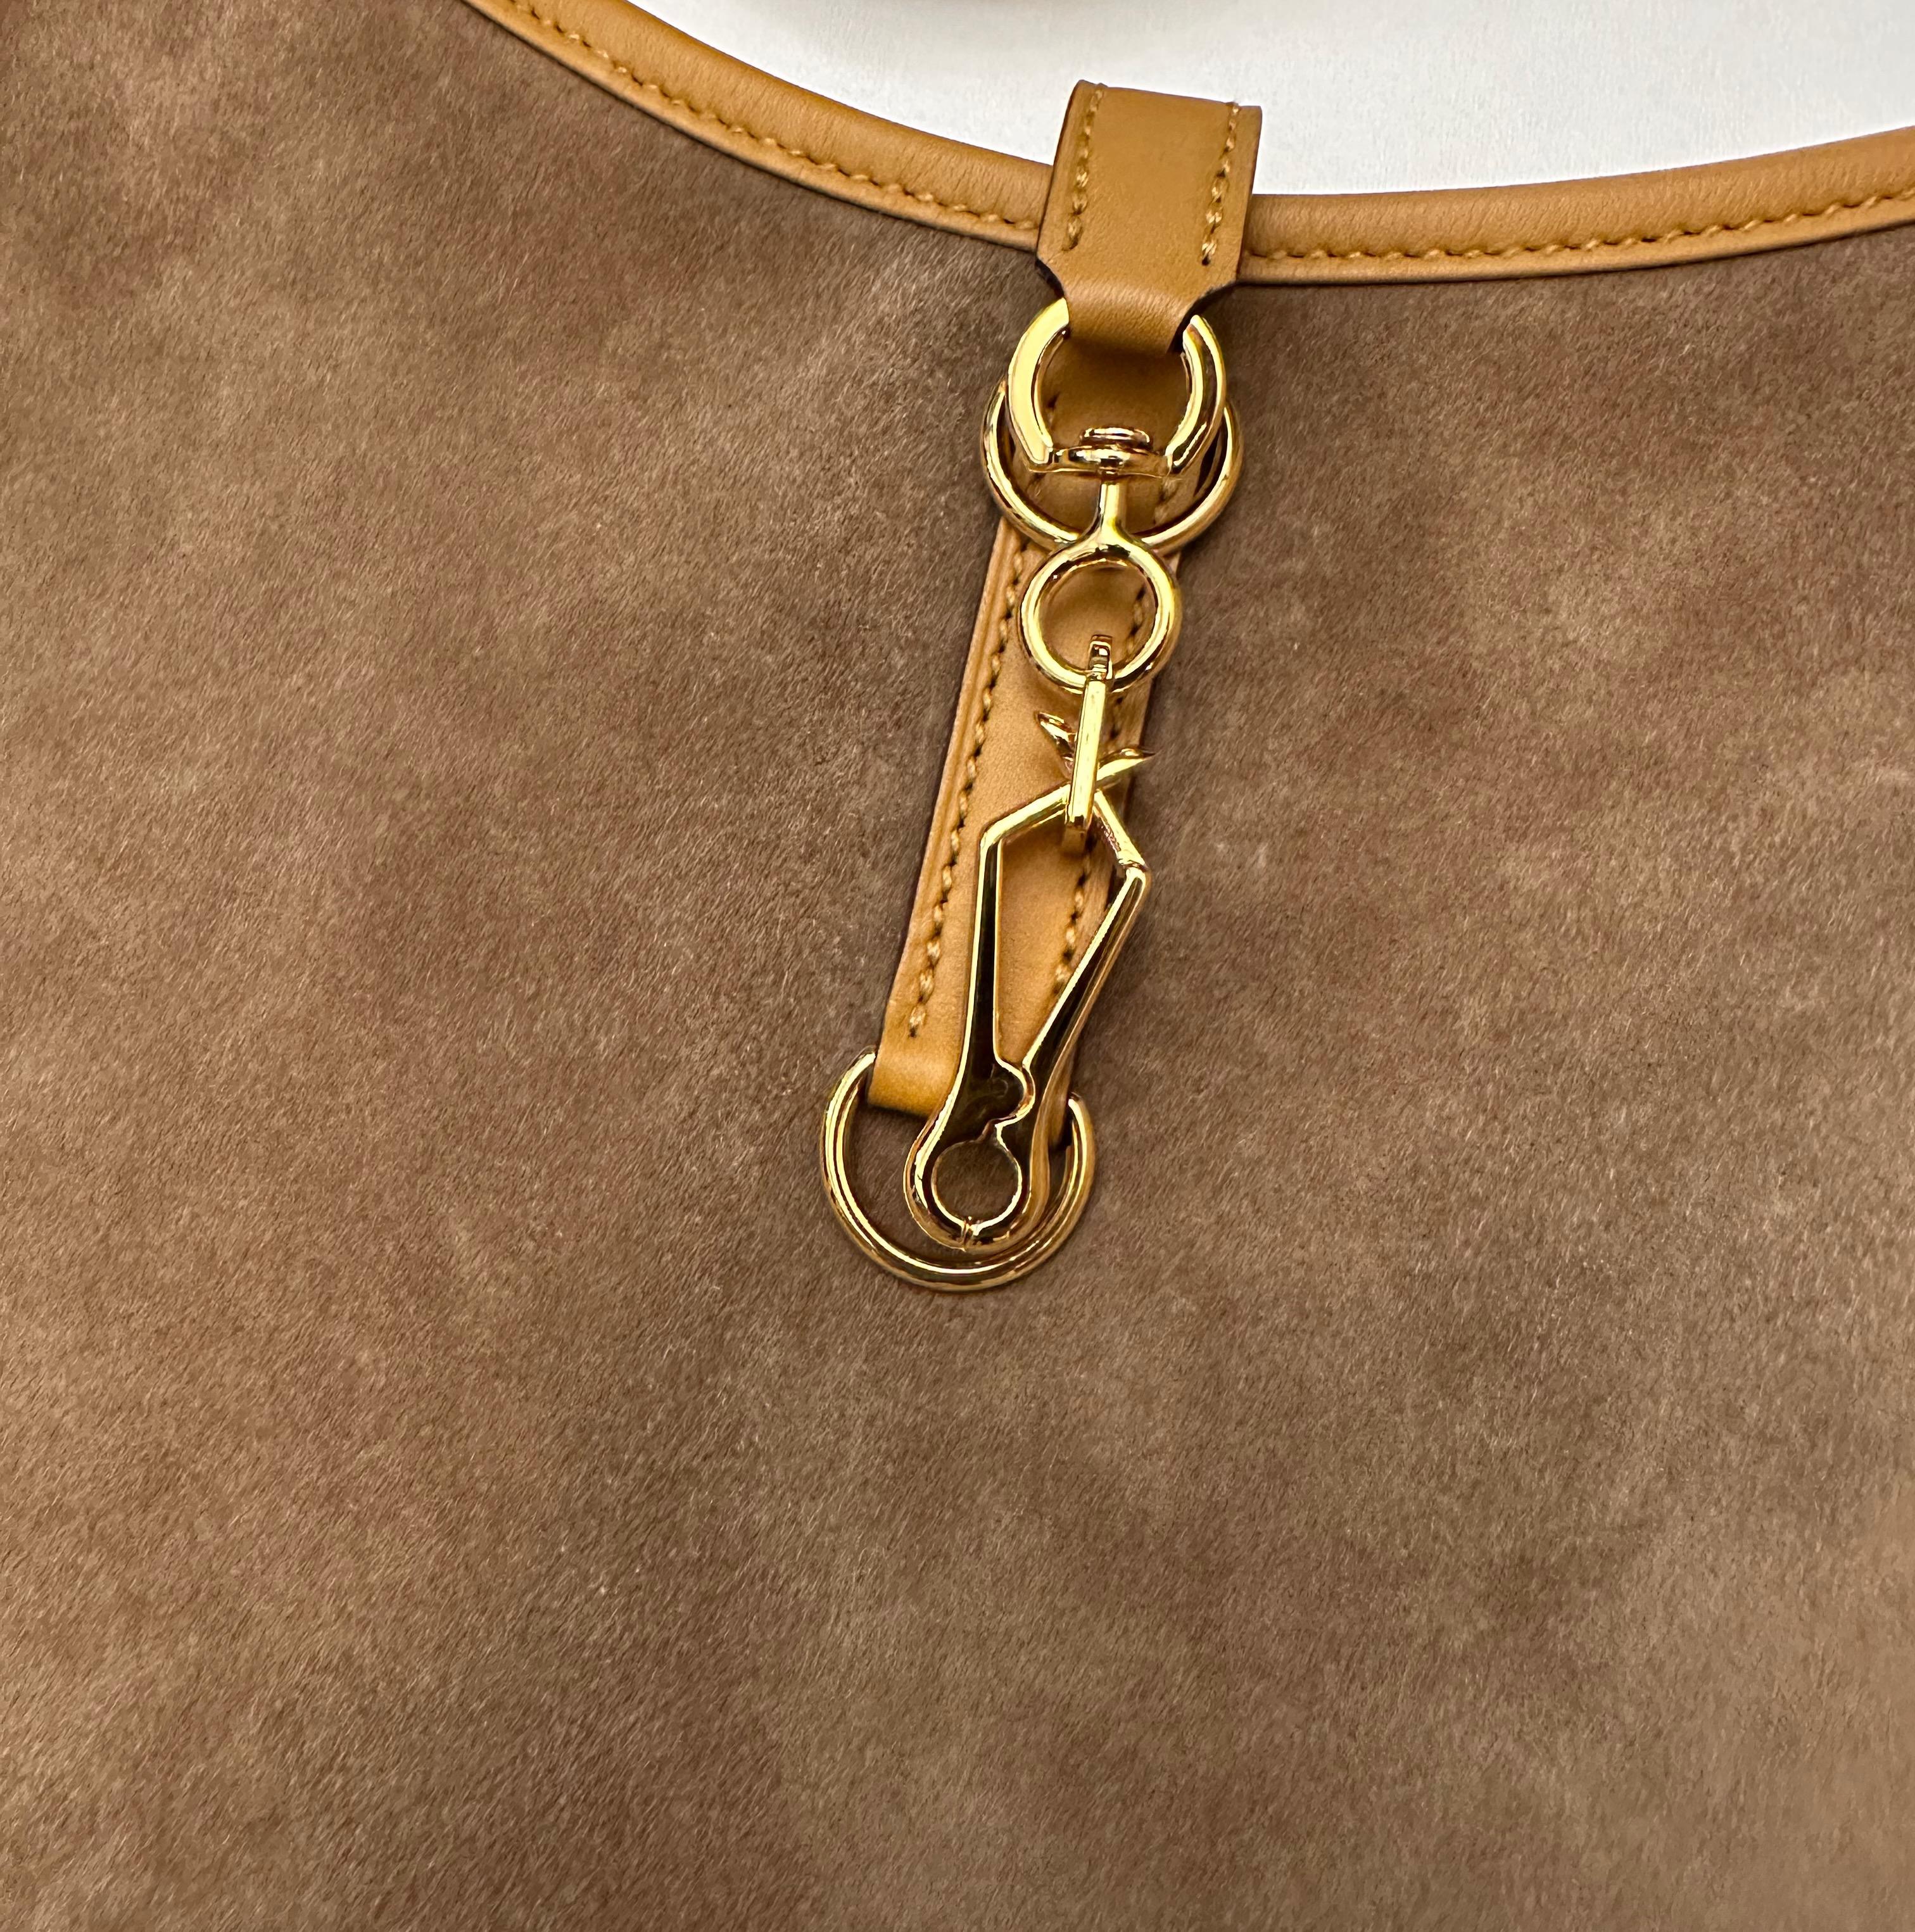 This pre-owned but new Veau Doblis Swift Anate Trim II 31 in Marron Glace and Sesame is a Limited Edition from the house of Hermès.
It is crafted of suede in a delicate marron glacé color and sesame Swift leather.
It features a looping shoulder